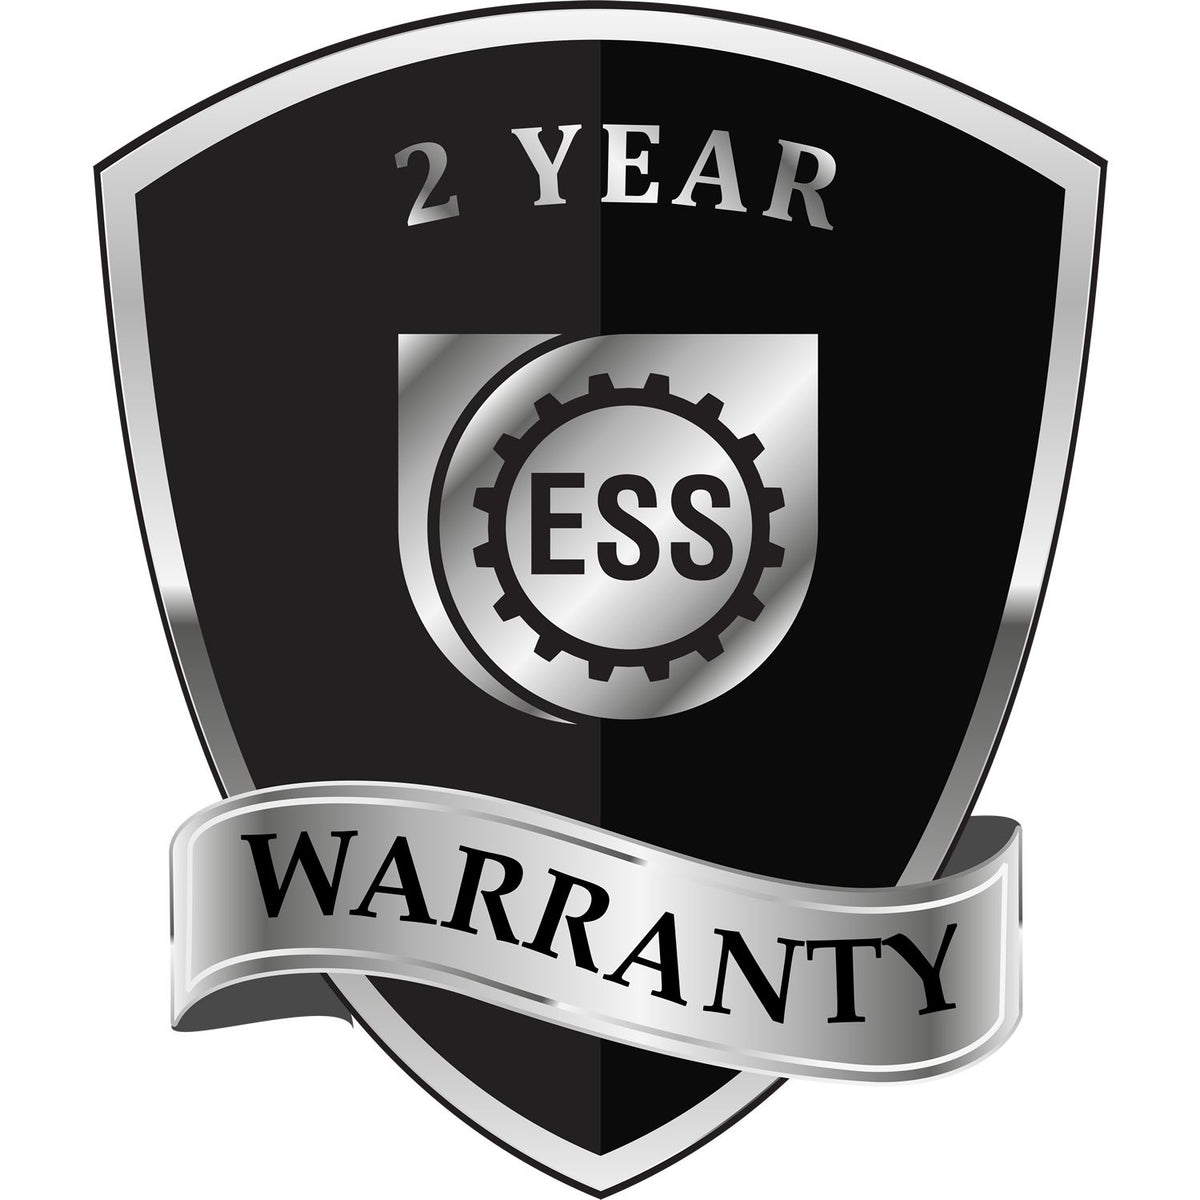 A black and silver badge or emblem showing warranty information for the Gift Idaho Engineer Seal